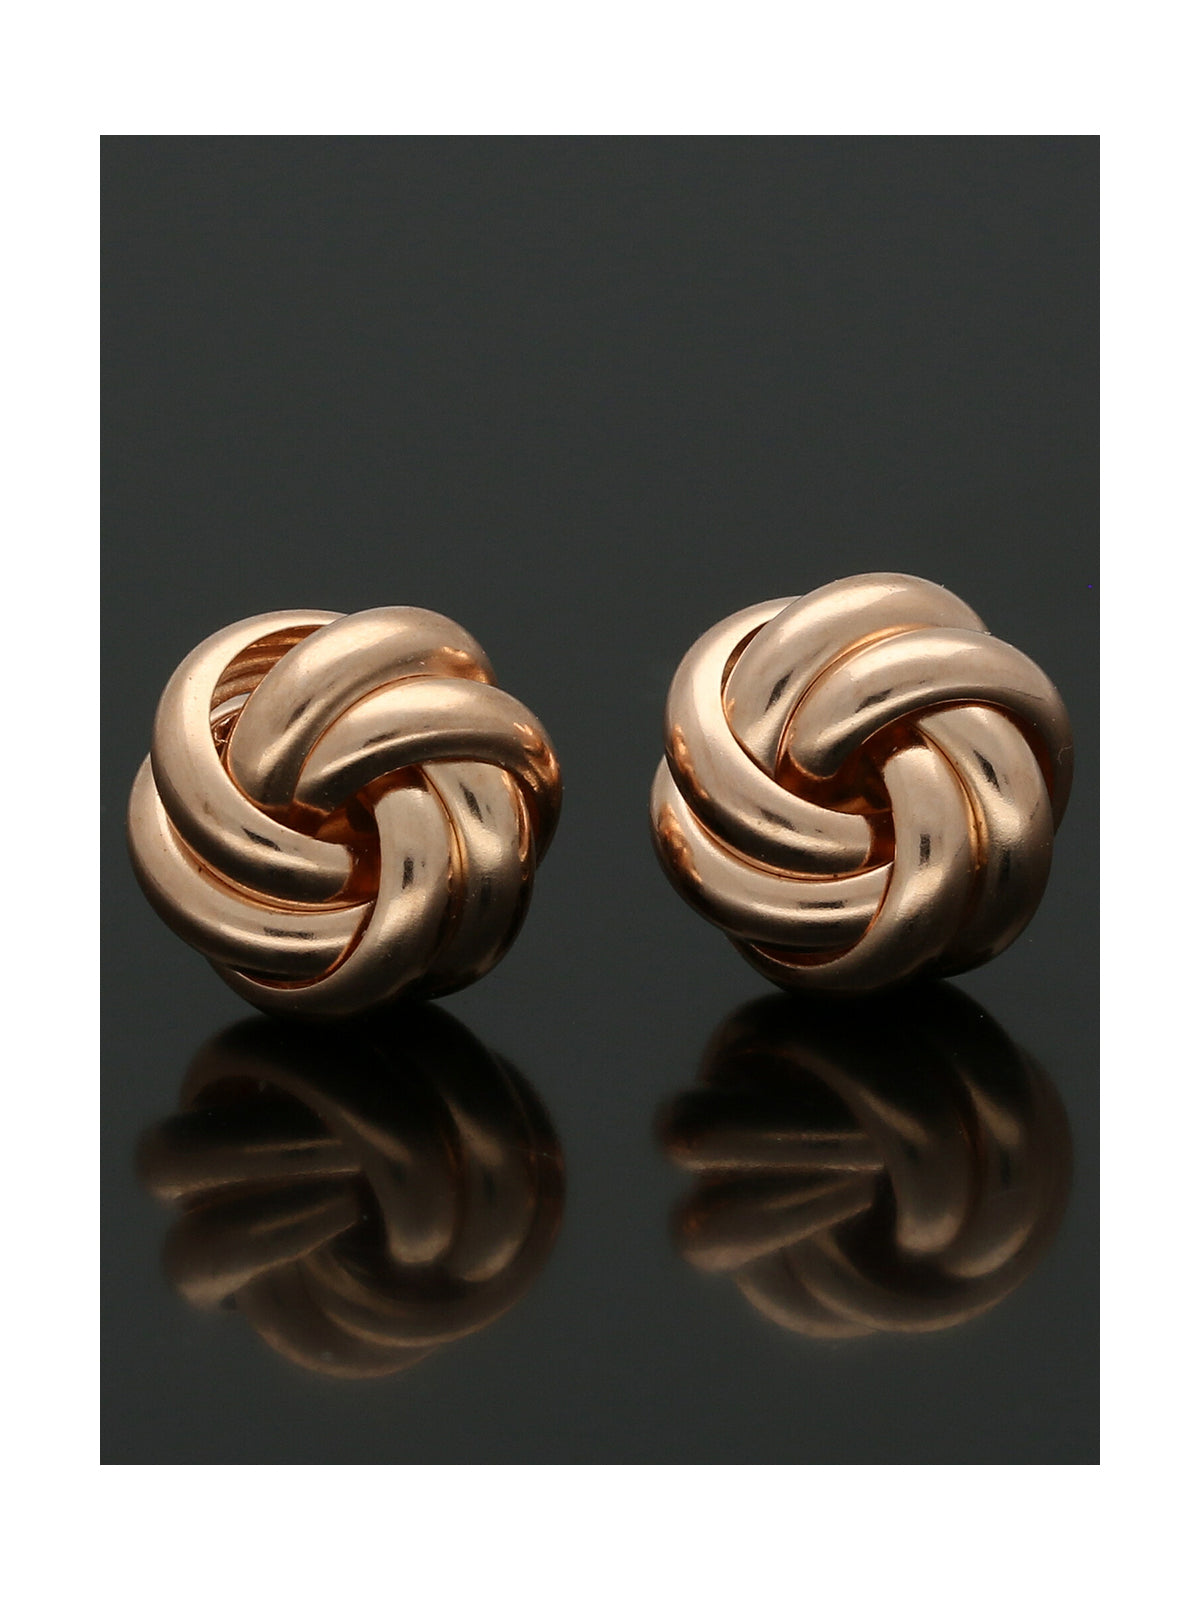 Knot Stud Earrings 10mm in 9ct Rose Gold